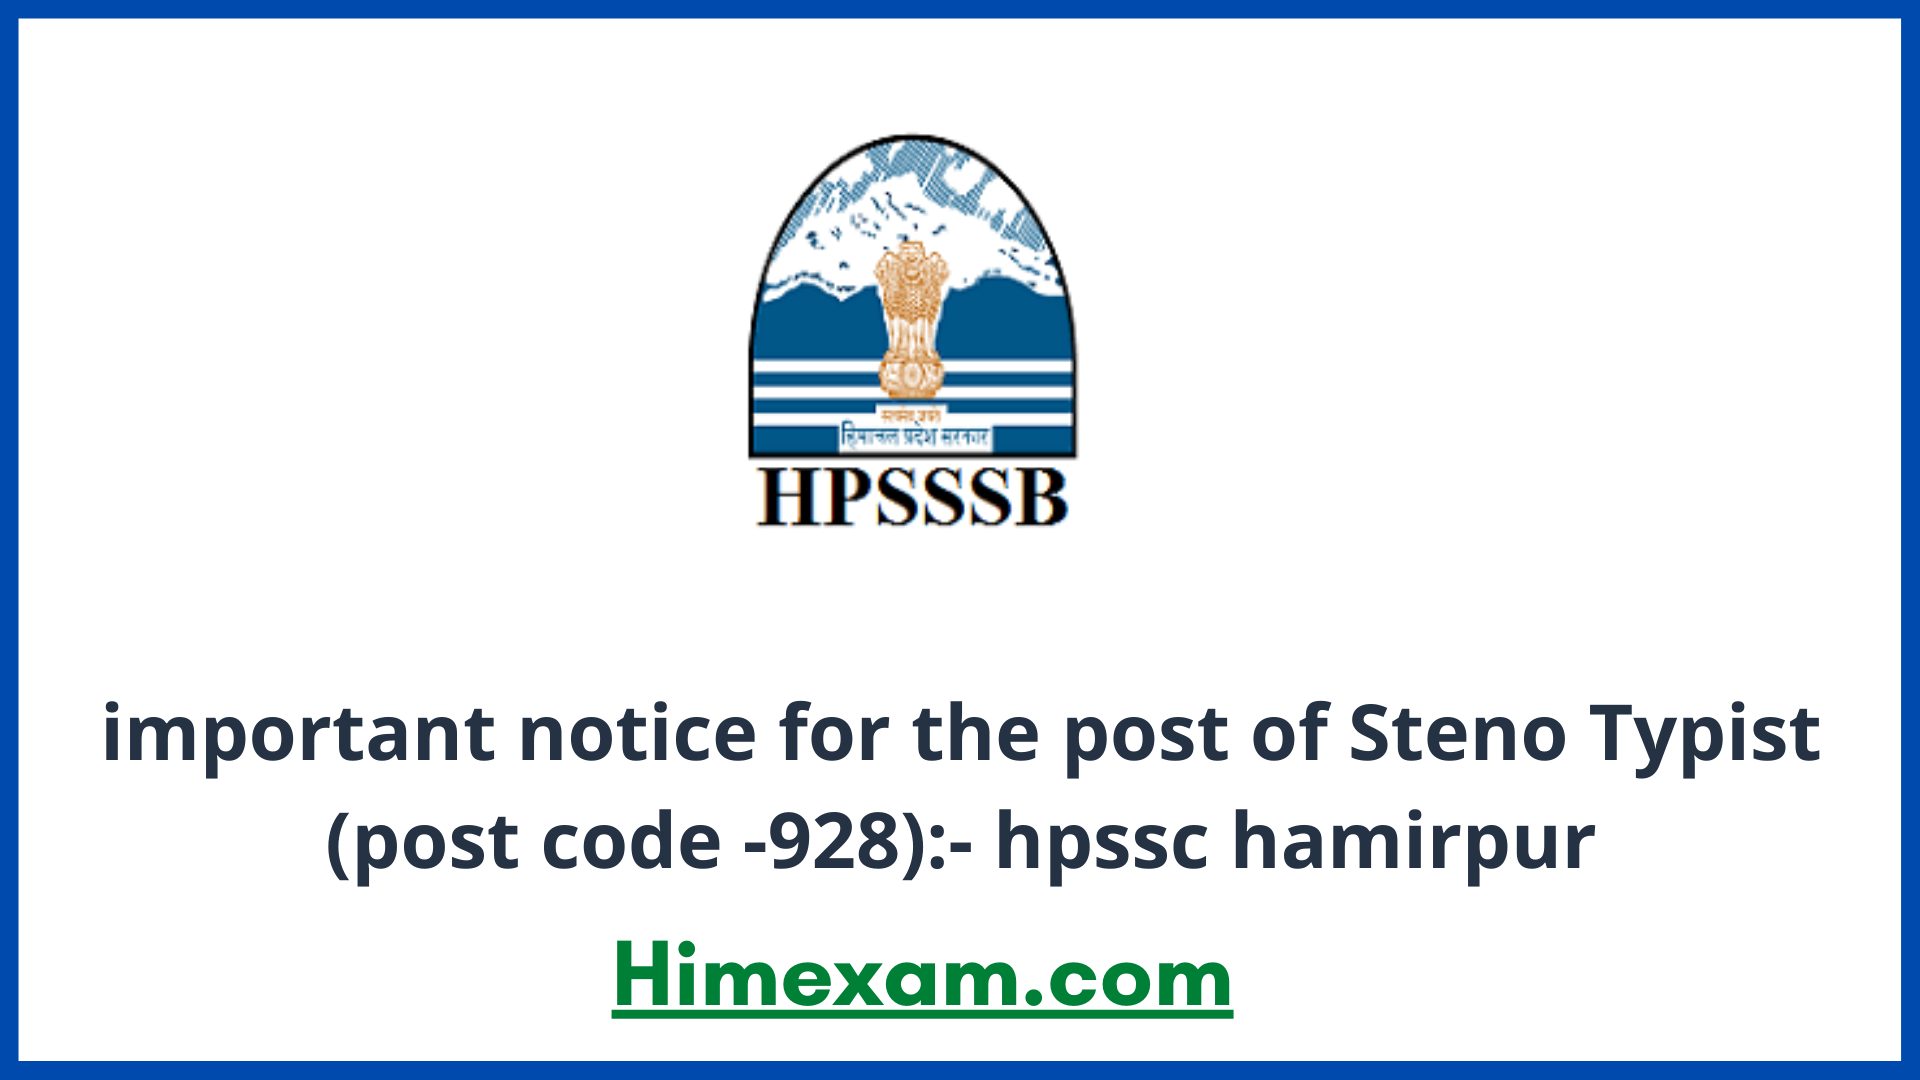 important notice for the post of Steno Typist (post code -928):- hpssc hamirpur